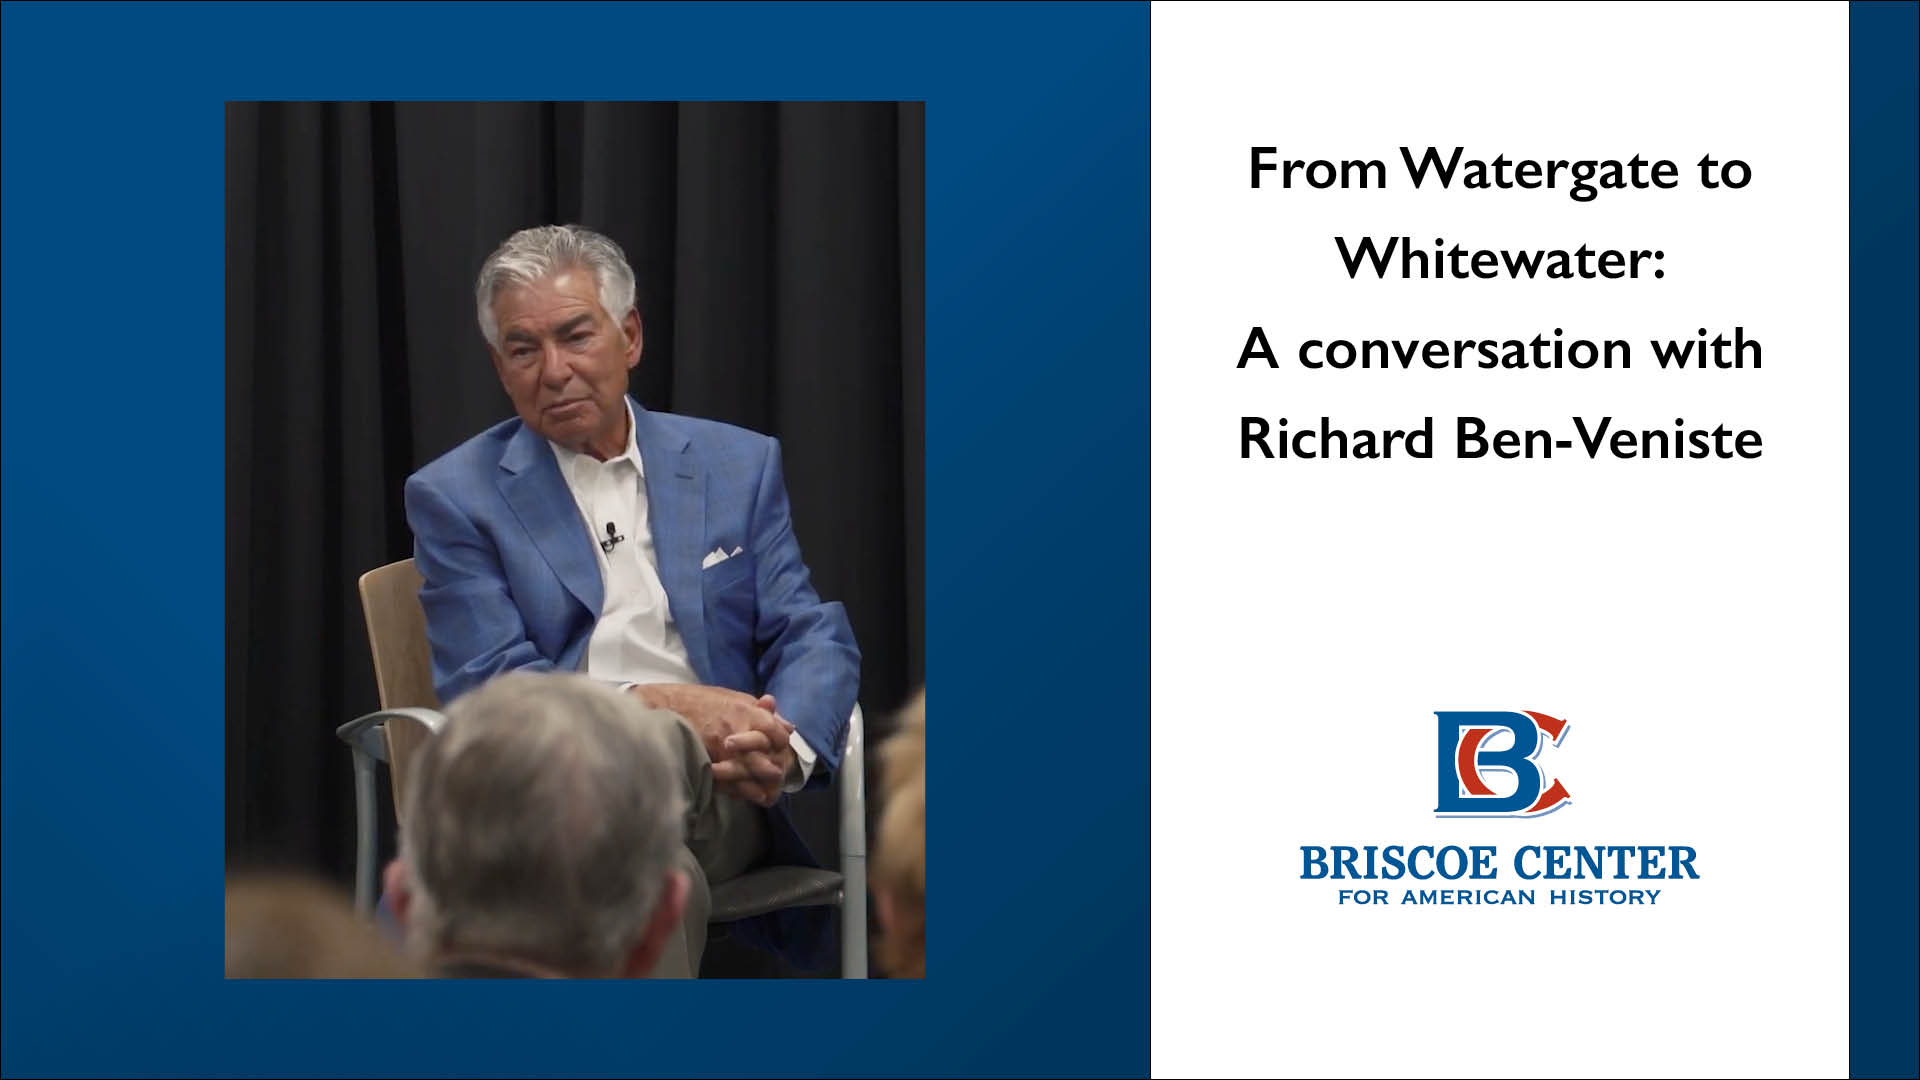 From Watergate to Whitewater: A conversation with Richard Ben-Veniste